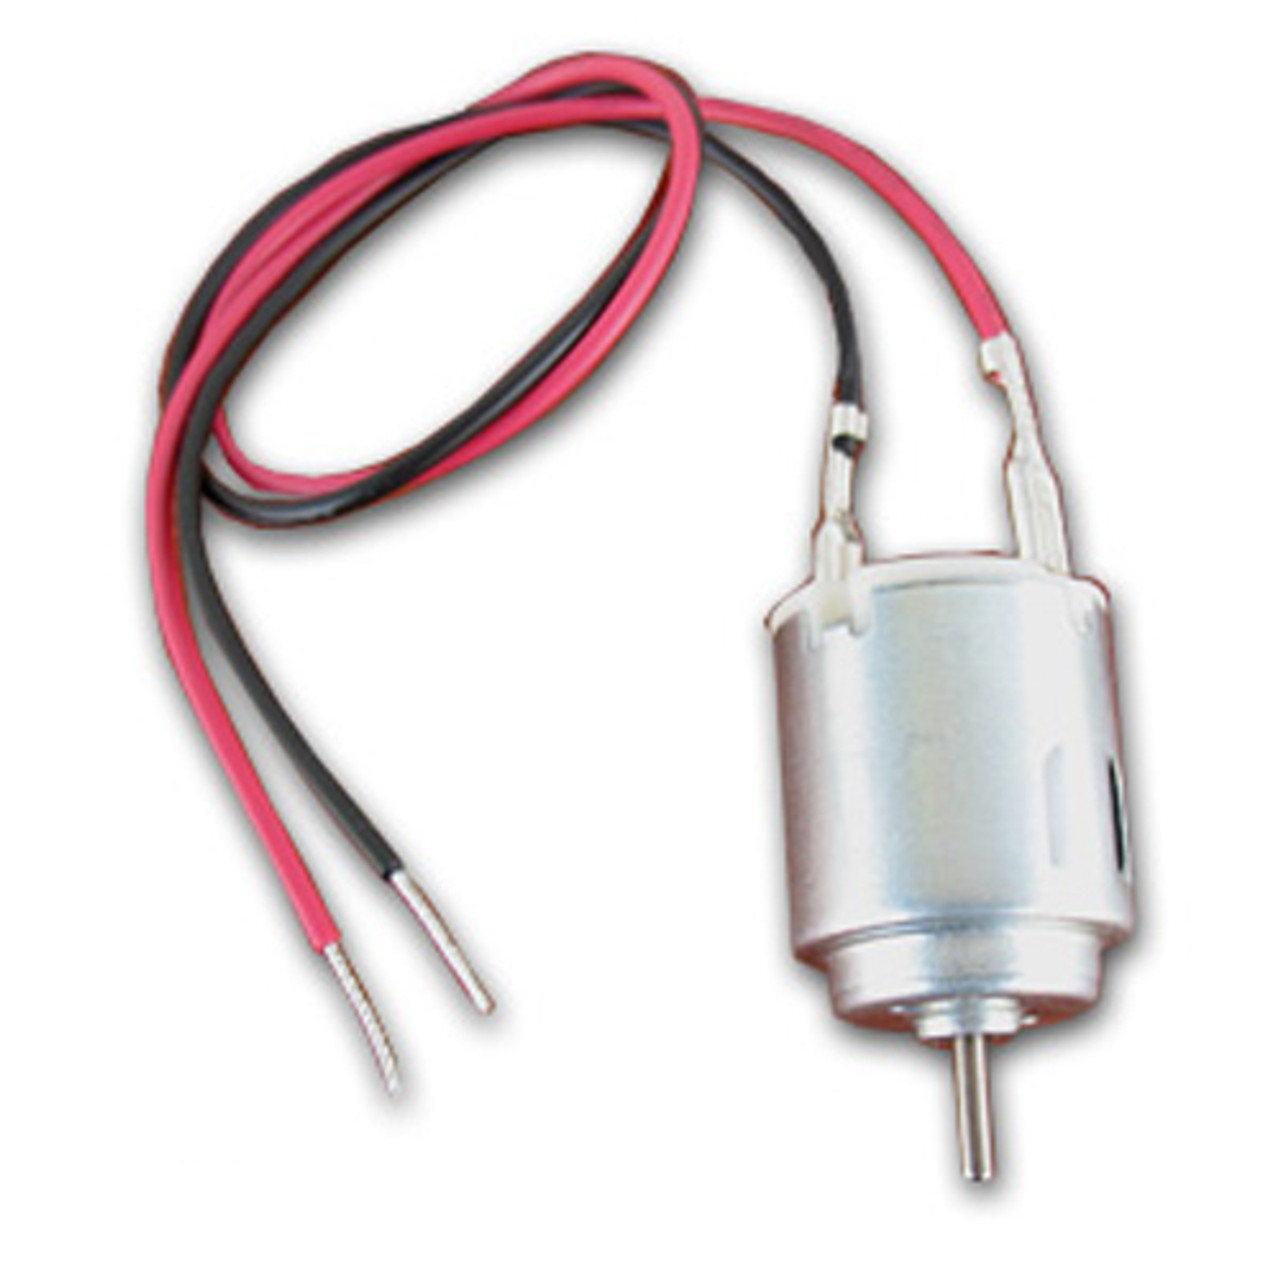 P56046 is a basic round toy motor often used in science kits. Ships with detached wires. Customers will plug in the wires when needed. One end of the wires have a female connector and the other end is stripped and tinned for easy connection. 